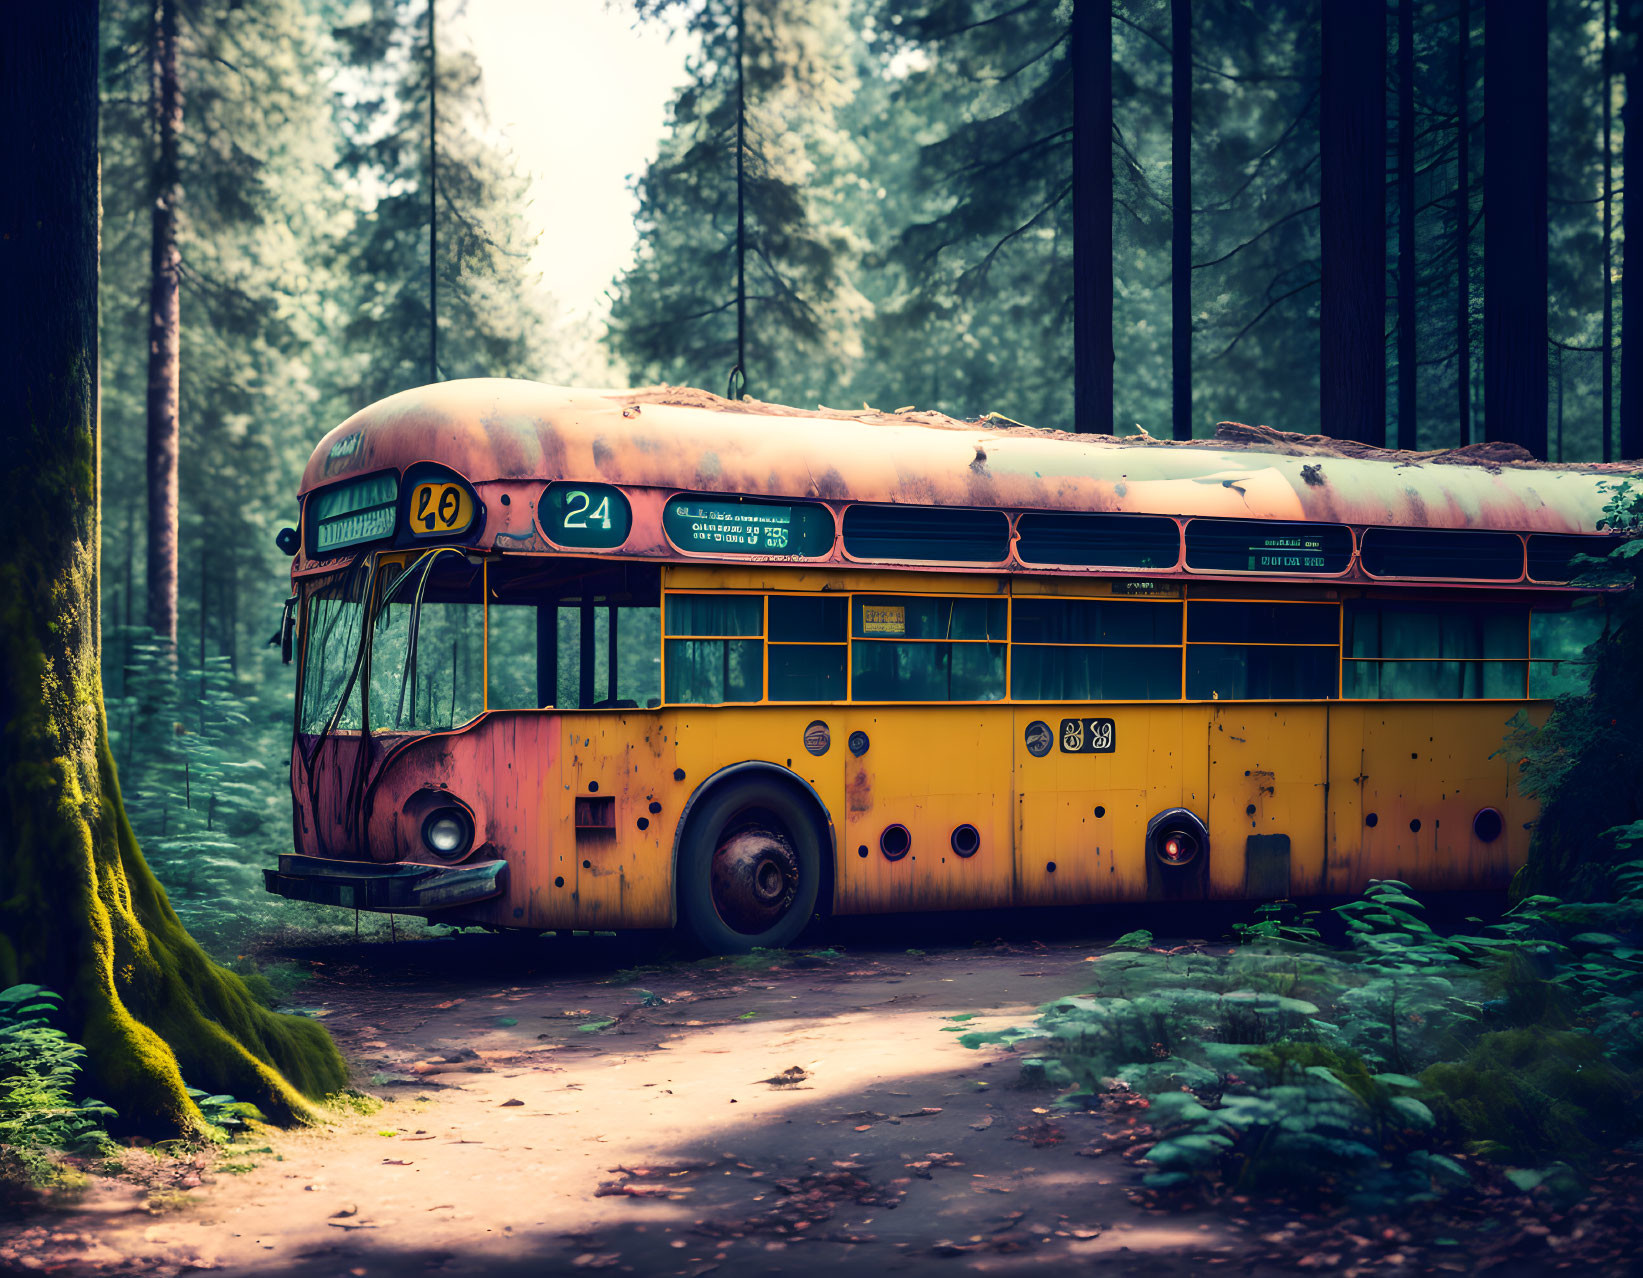 Rusty yellow bus in dense forest with misty atmosphere